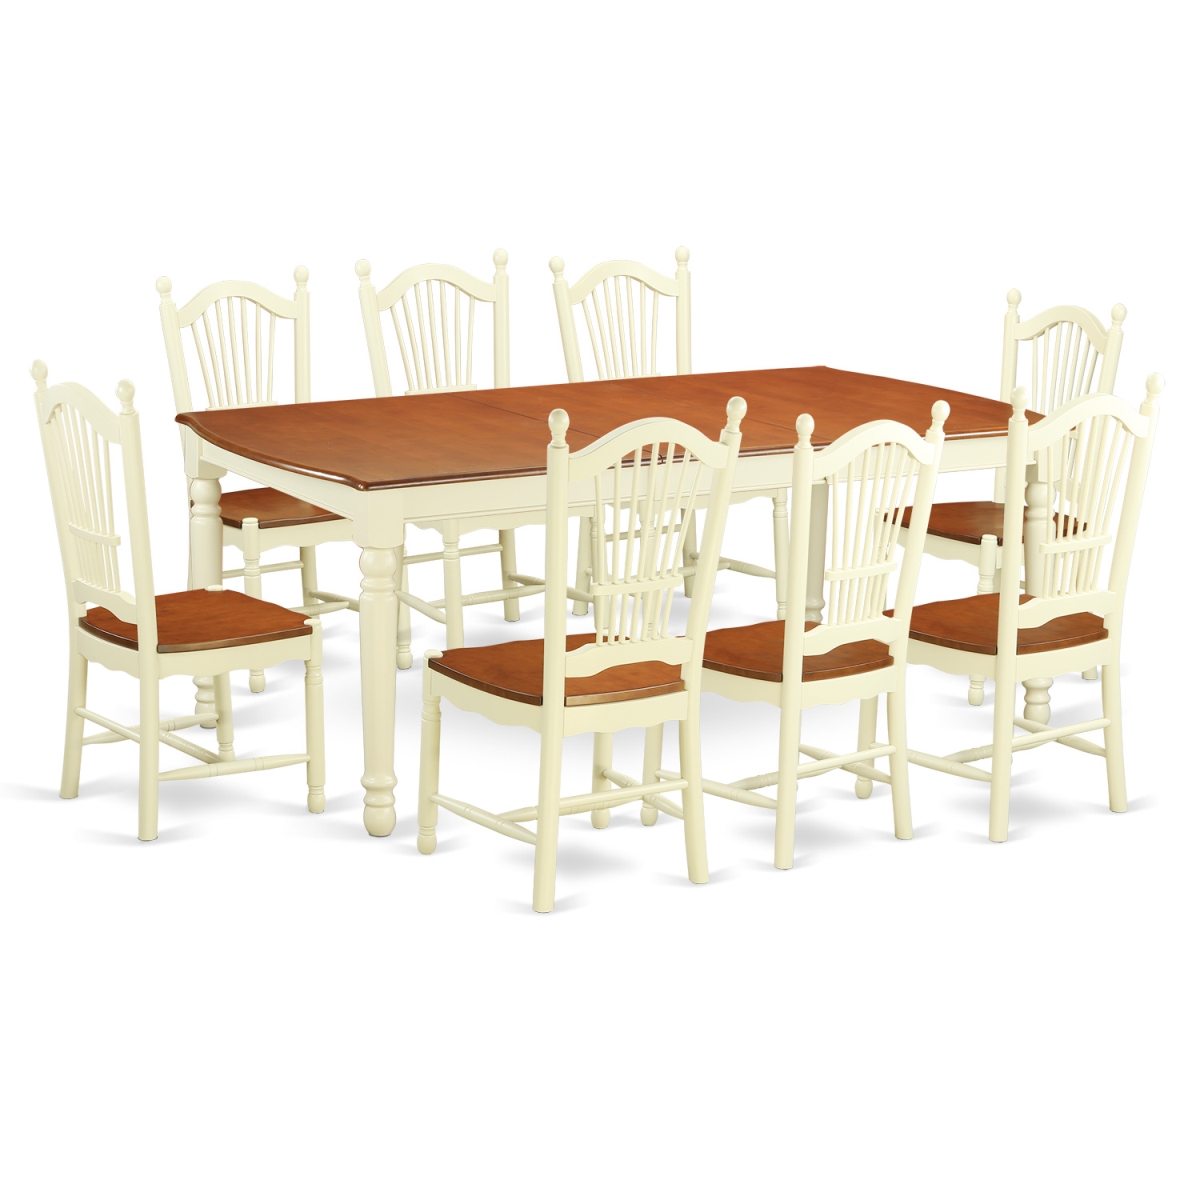 DOVE9-WHI-W Kitchen Nook Dining Set with 8 Table & 8 Chairs, Buttermilk & Cherry - 9 Piece -  East West Furniture